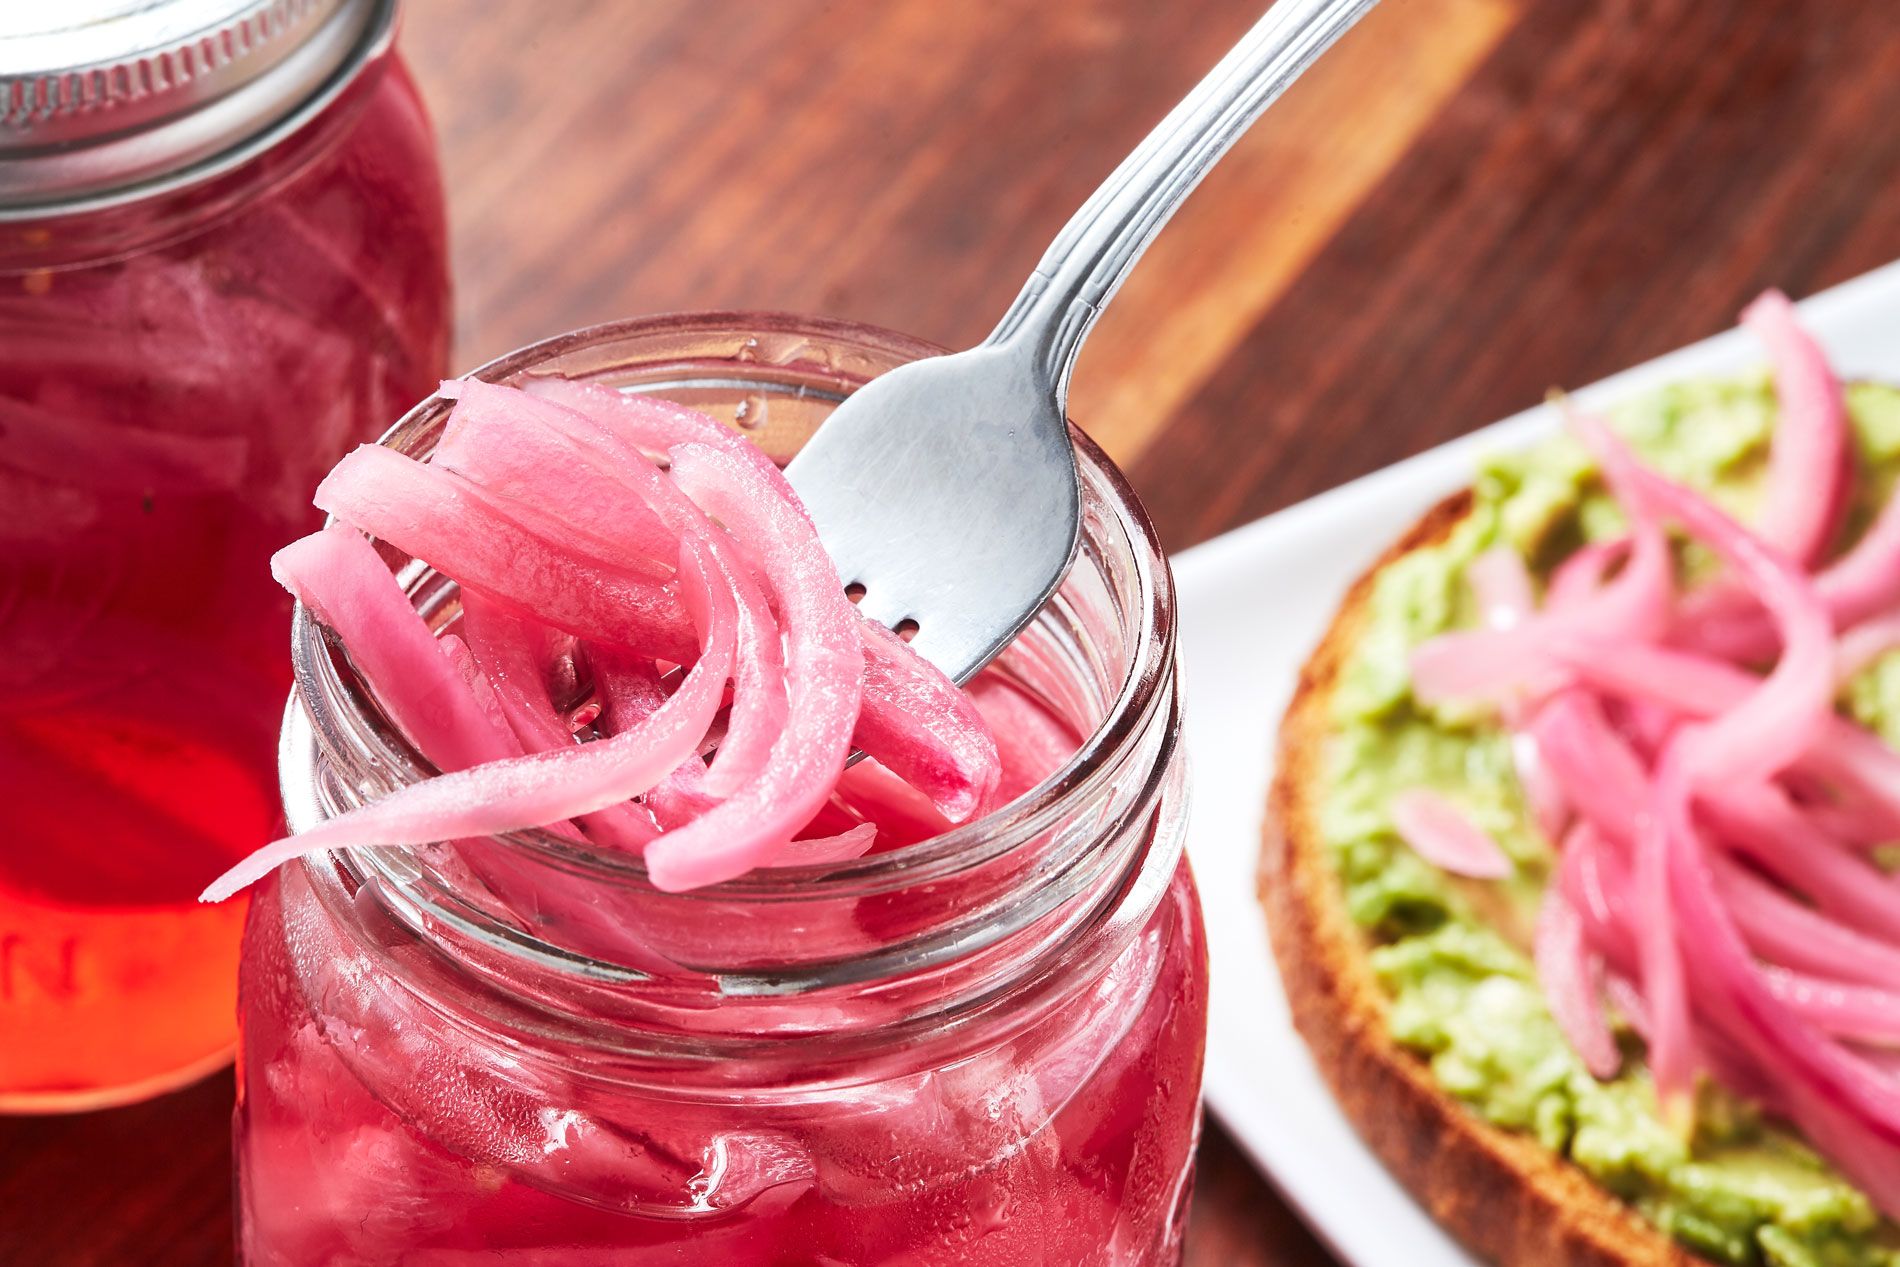 Pickled Red Onions Recipe - To Pickled Red Onions